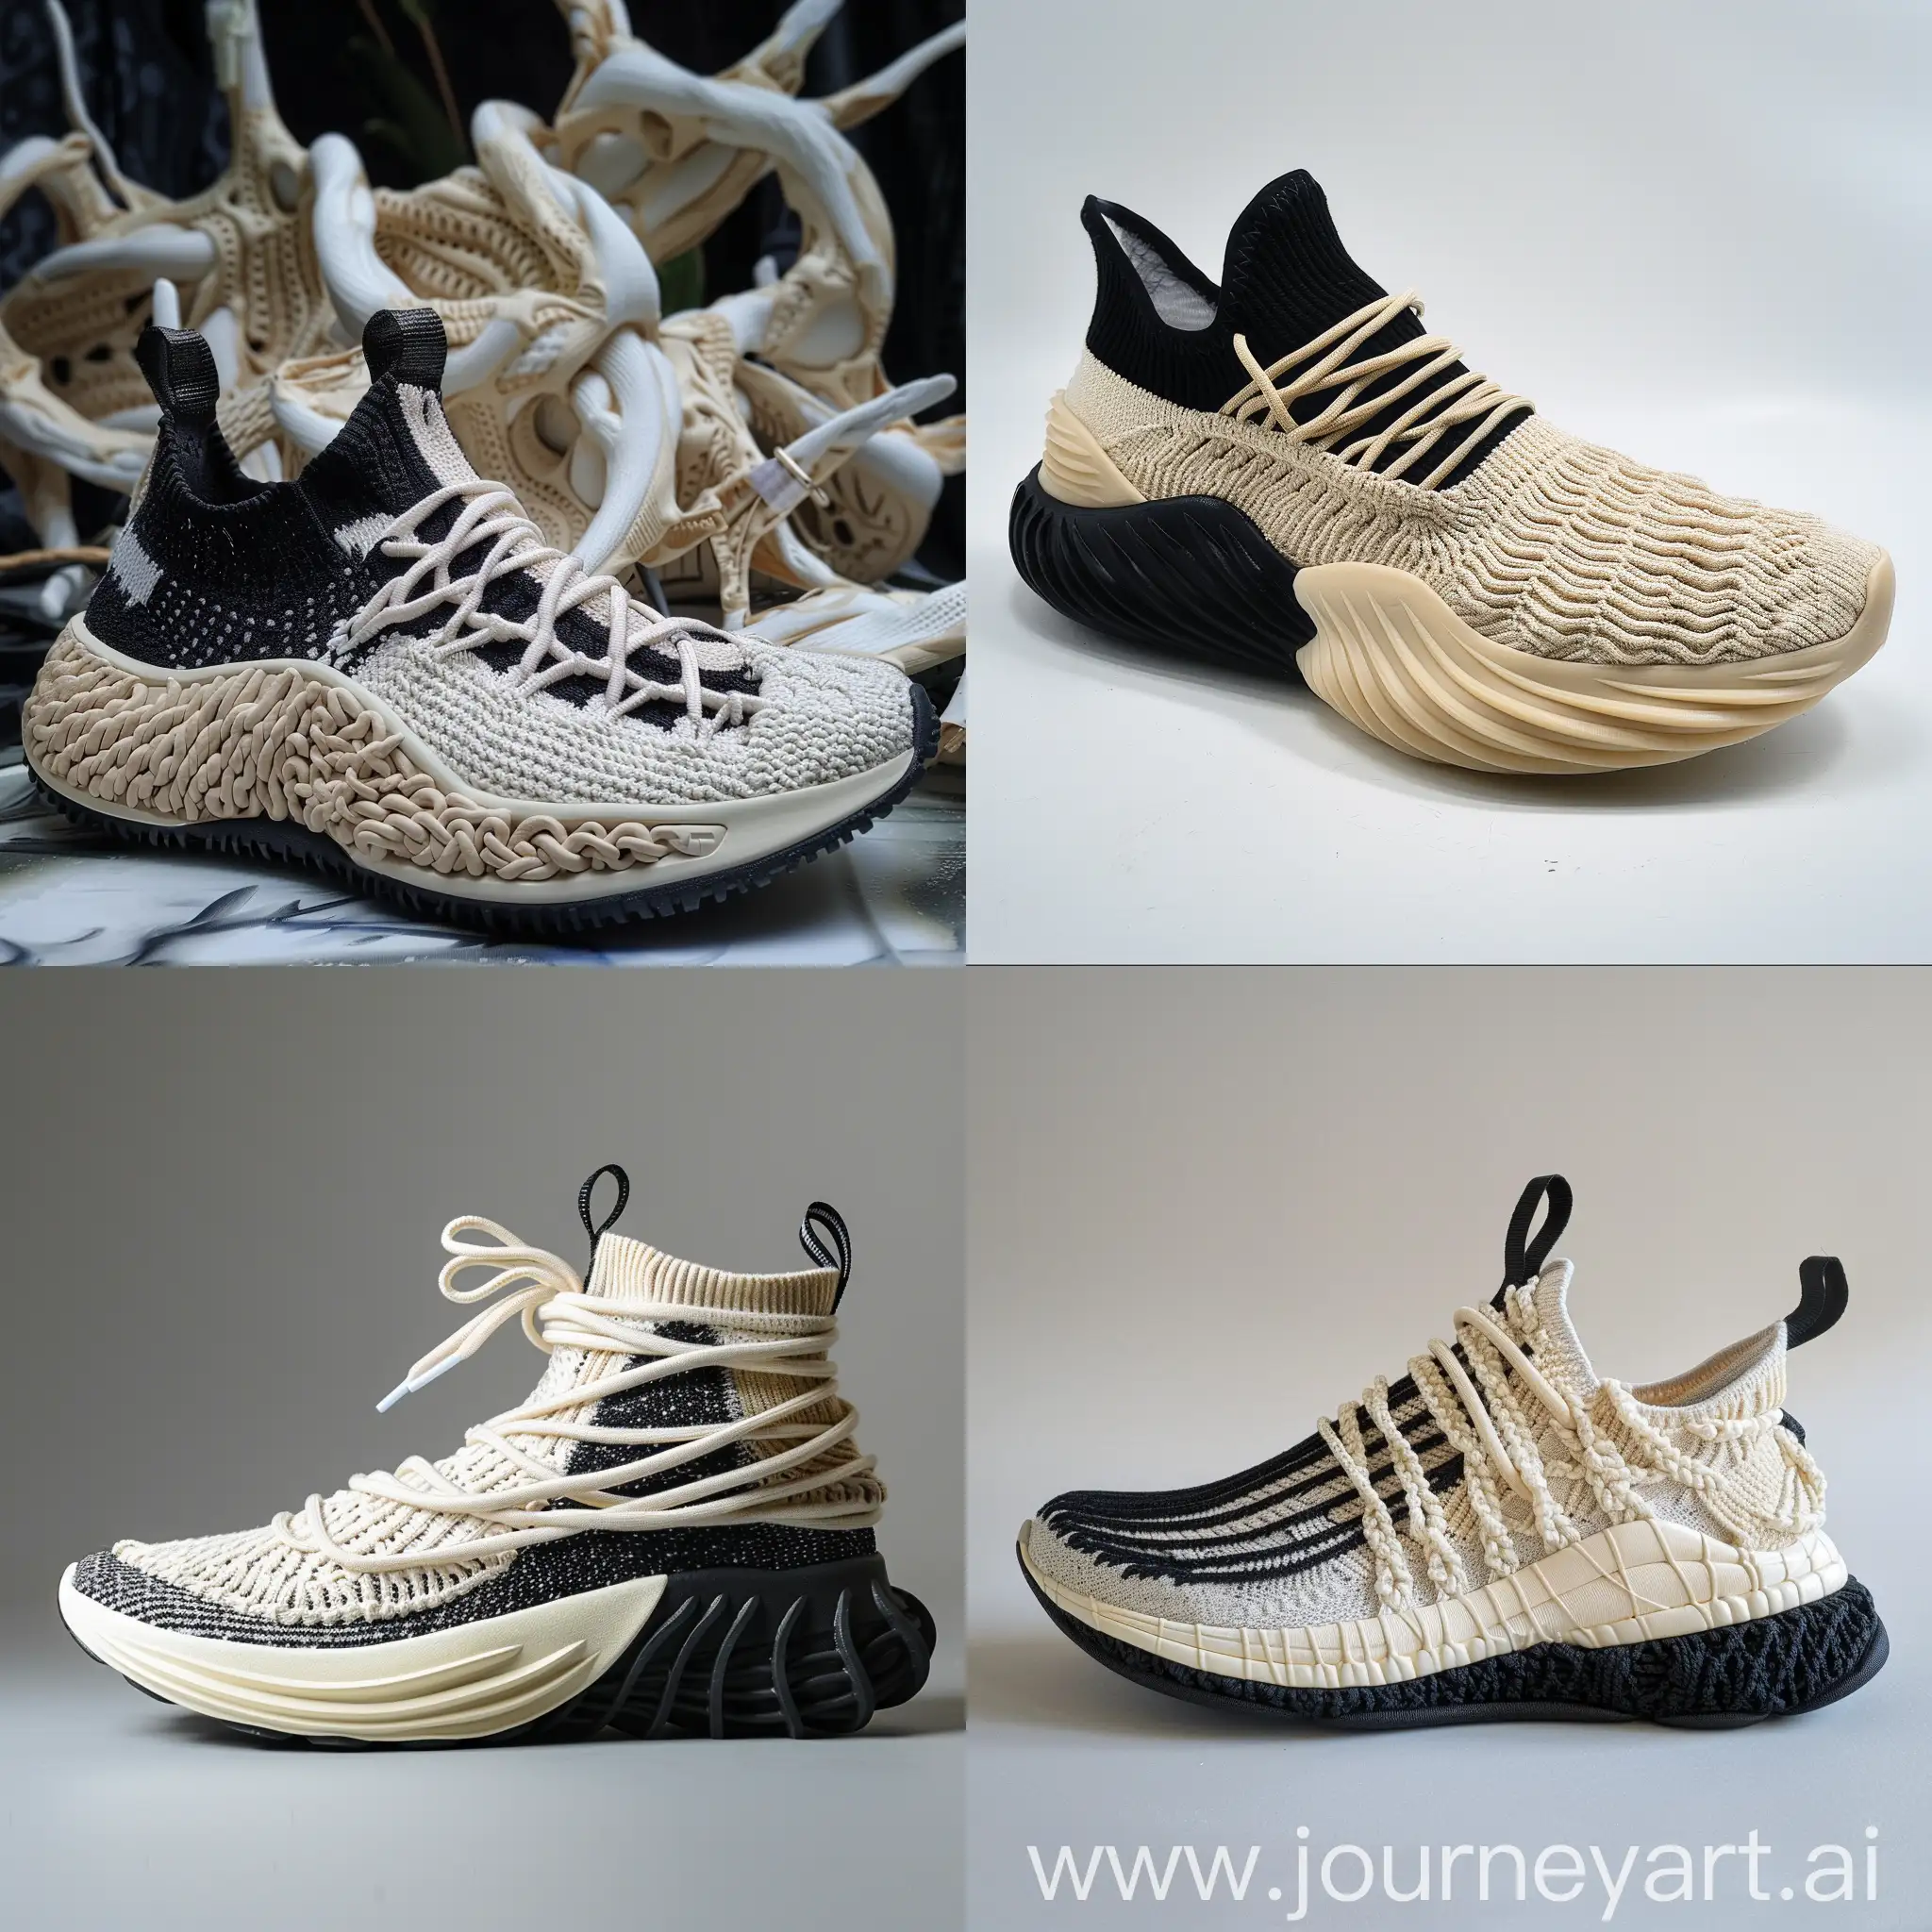 Sneakers design , running and sports , inspired by shark bone , cream color rubber midsole , knitted cables on midsole , some knitted cables on upper , upper color black and cream , low neck , black outsole , knitted laces , 